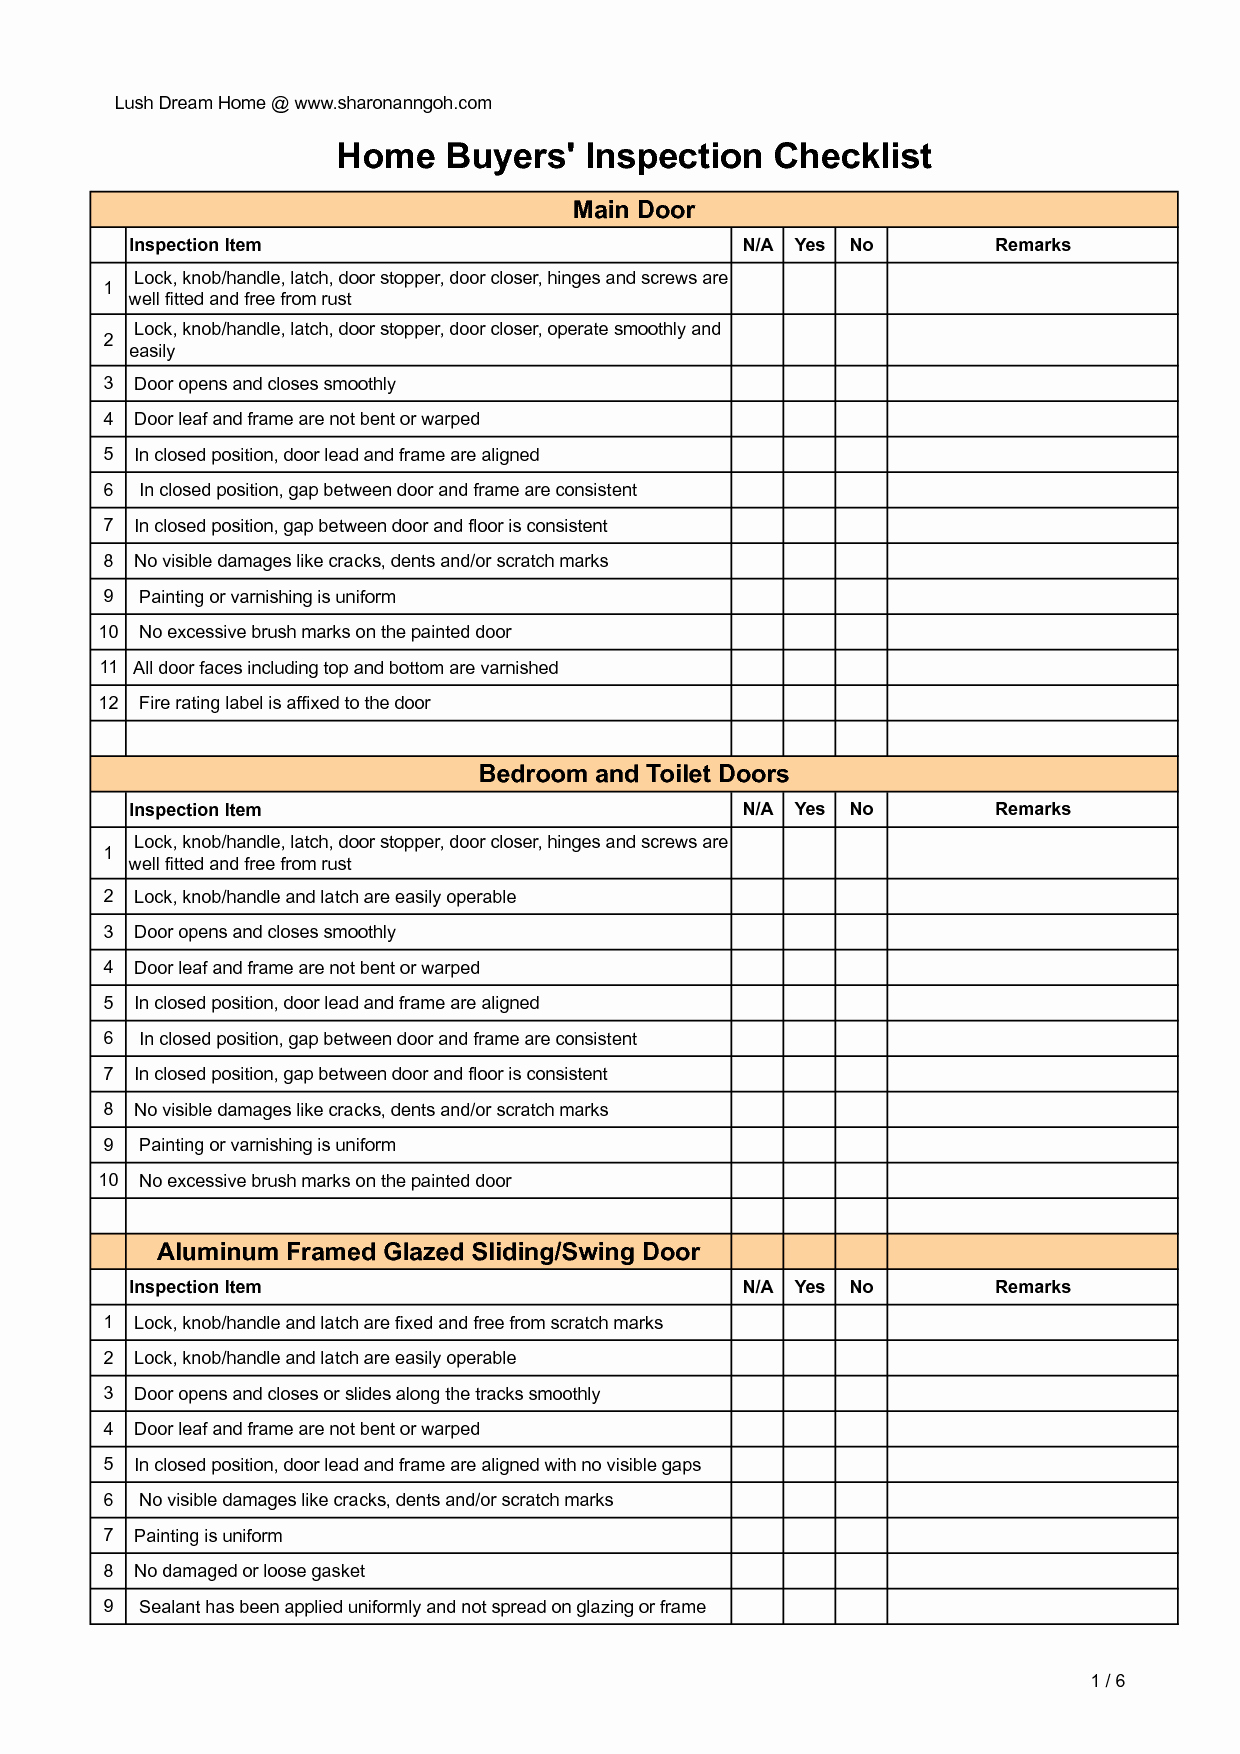 Mortgage Processing Checklist Templates New Creating A Home Inspection Checklist Using Microsoft Excel Can Be Very Helpful for Home Owners